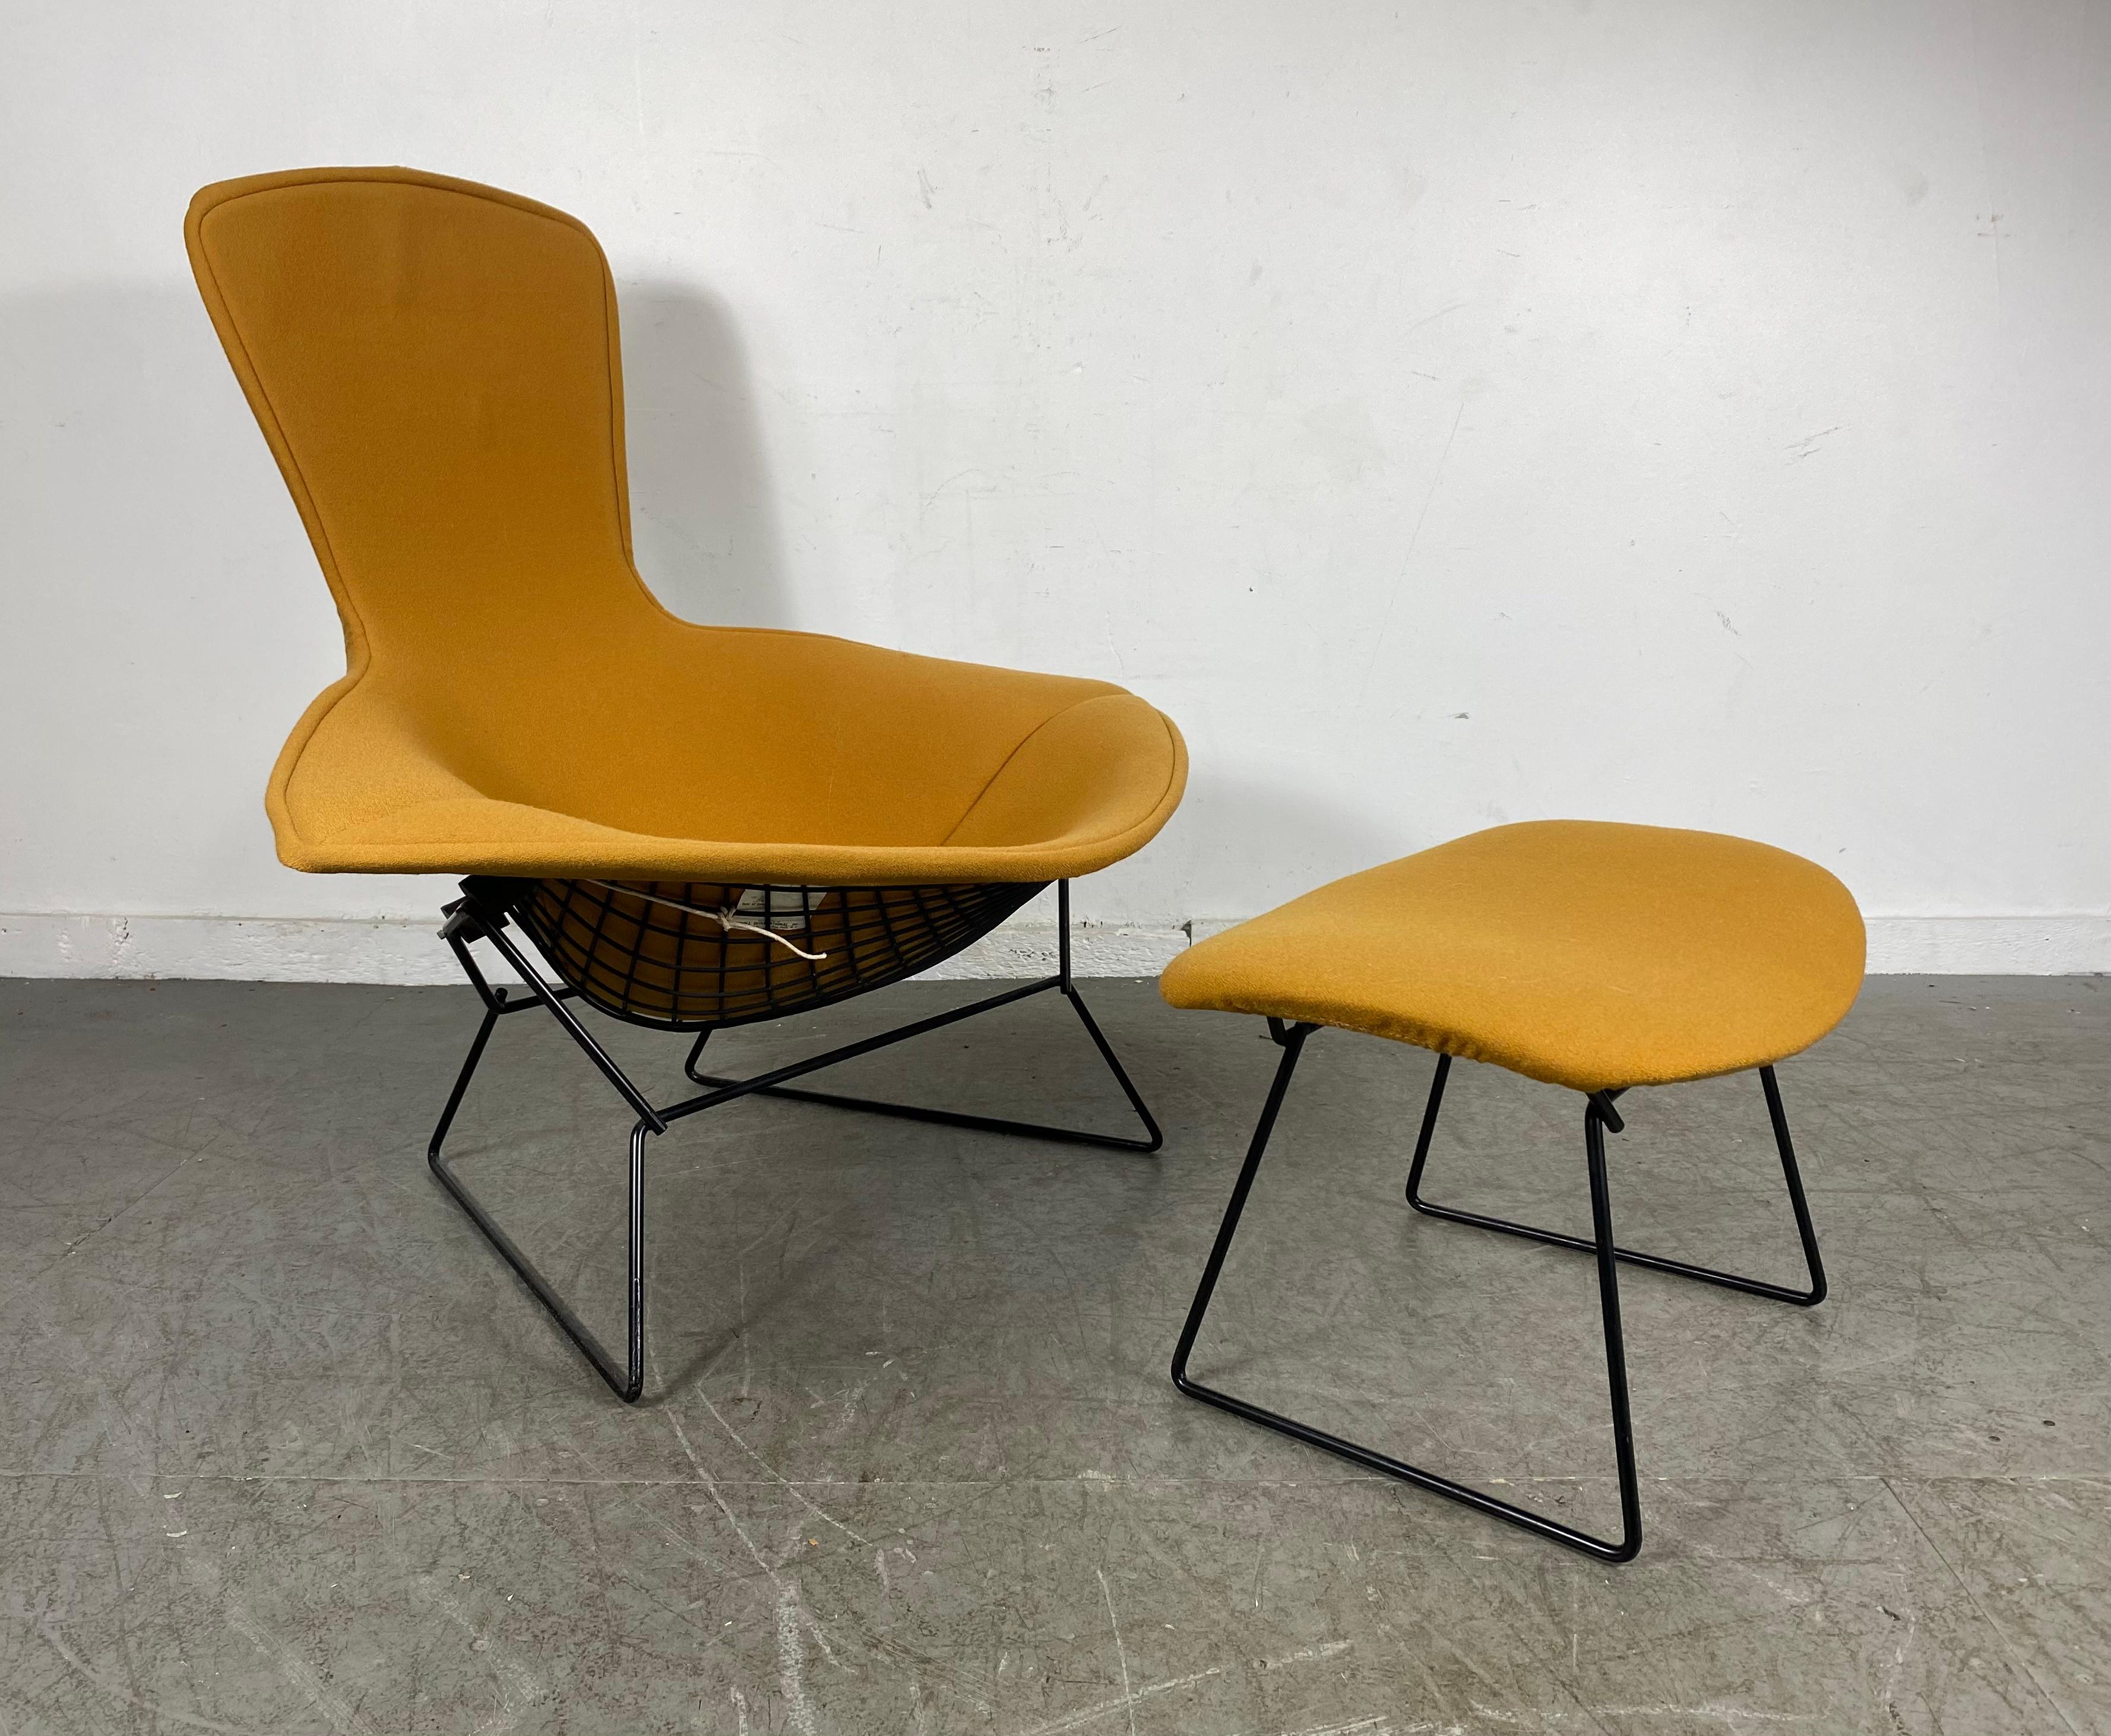 Design Harry bertoia for Knoll, Model Bird armchair with ottoman, 1980, retains original label.

Harry Bertoia for Knoll. Vogel armchair and ottoman in black lacquered steel wires that form grids, the upholstered pads were custom ordered from